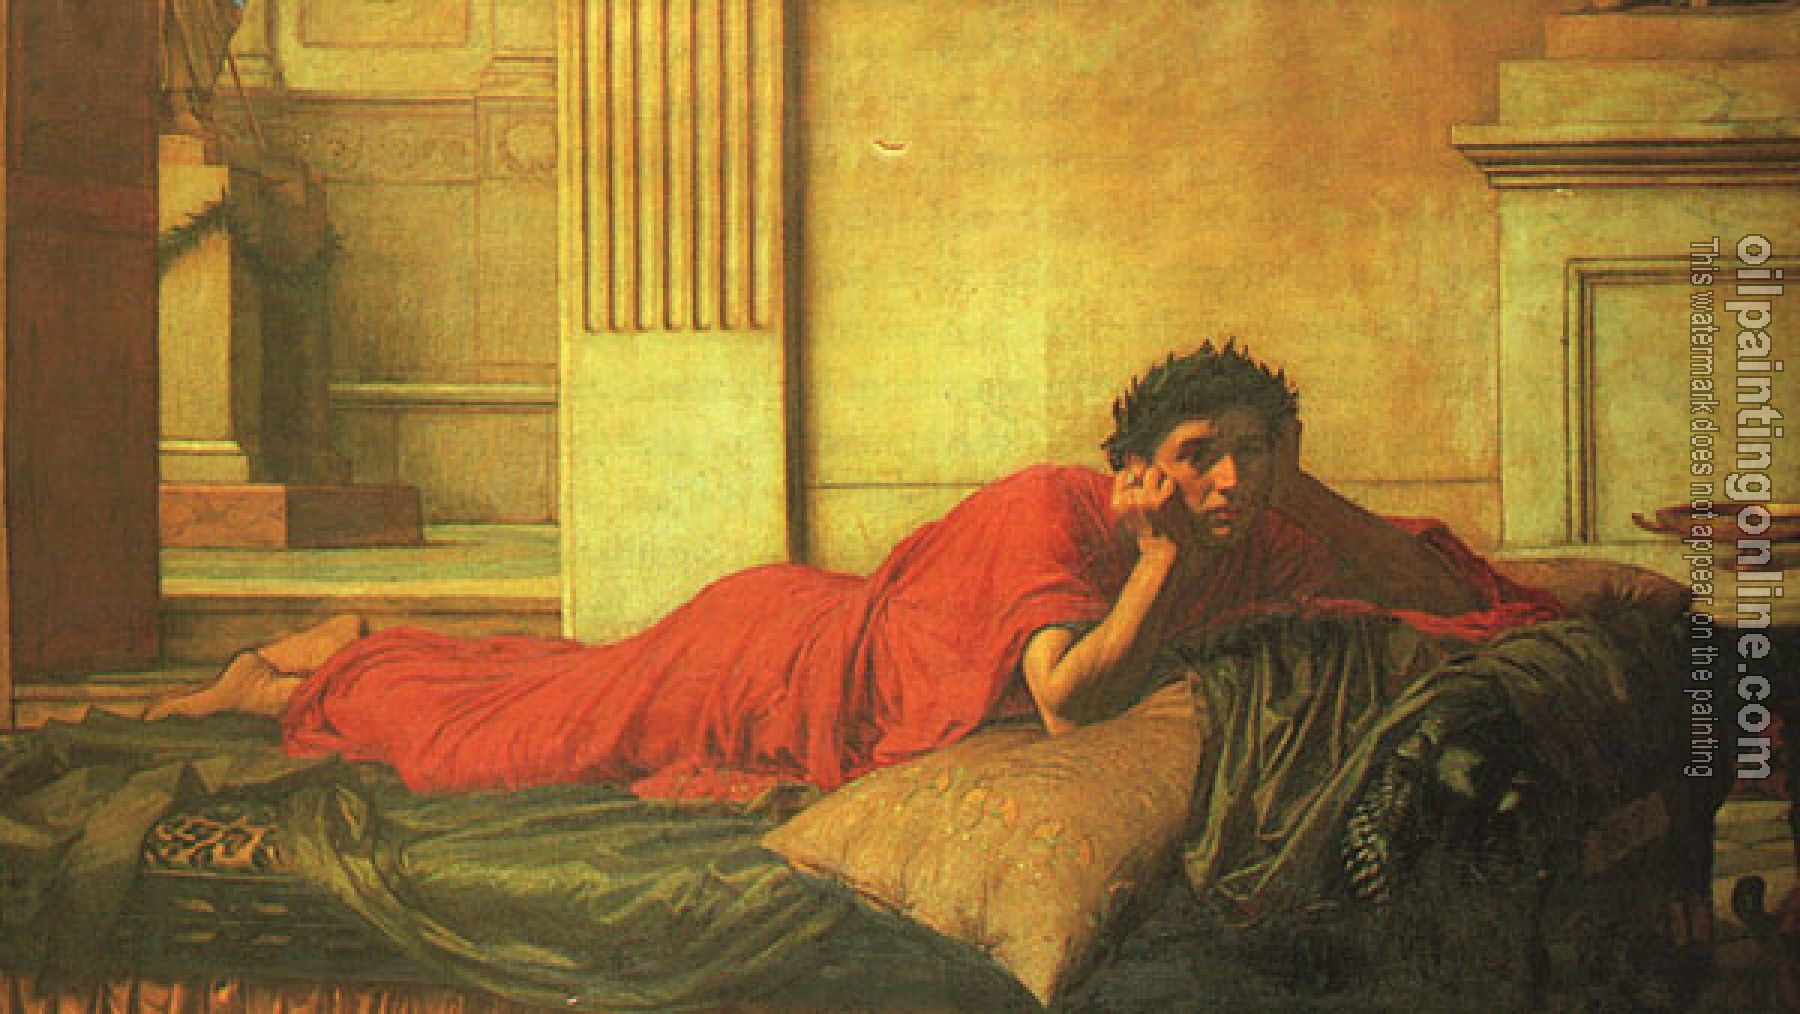 Waterhouse, John William - The Remorse of Nero after the Murder of his Mother